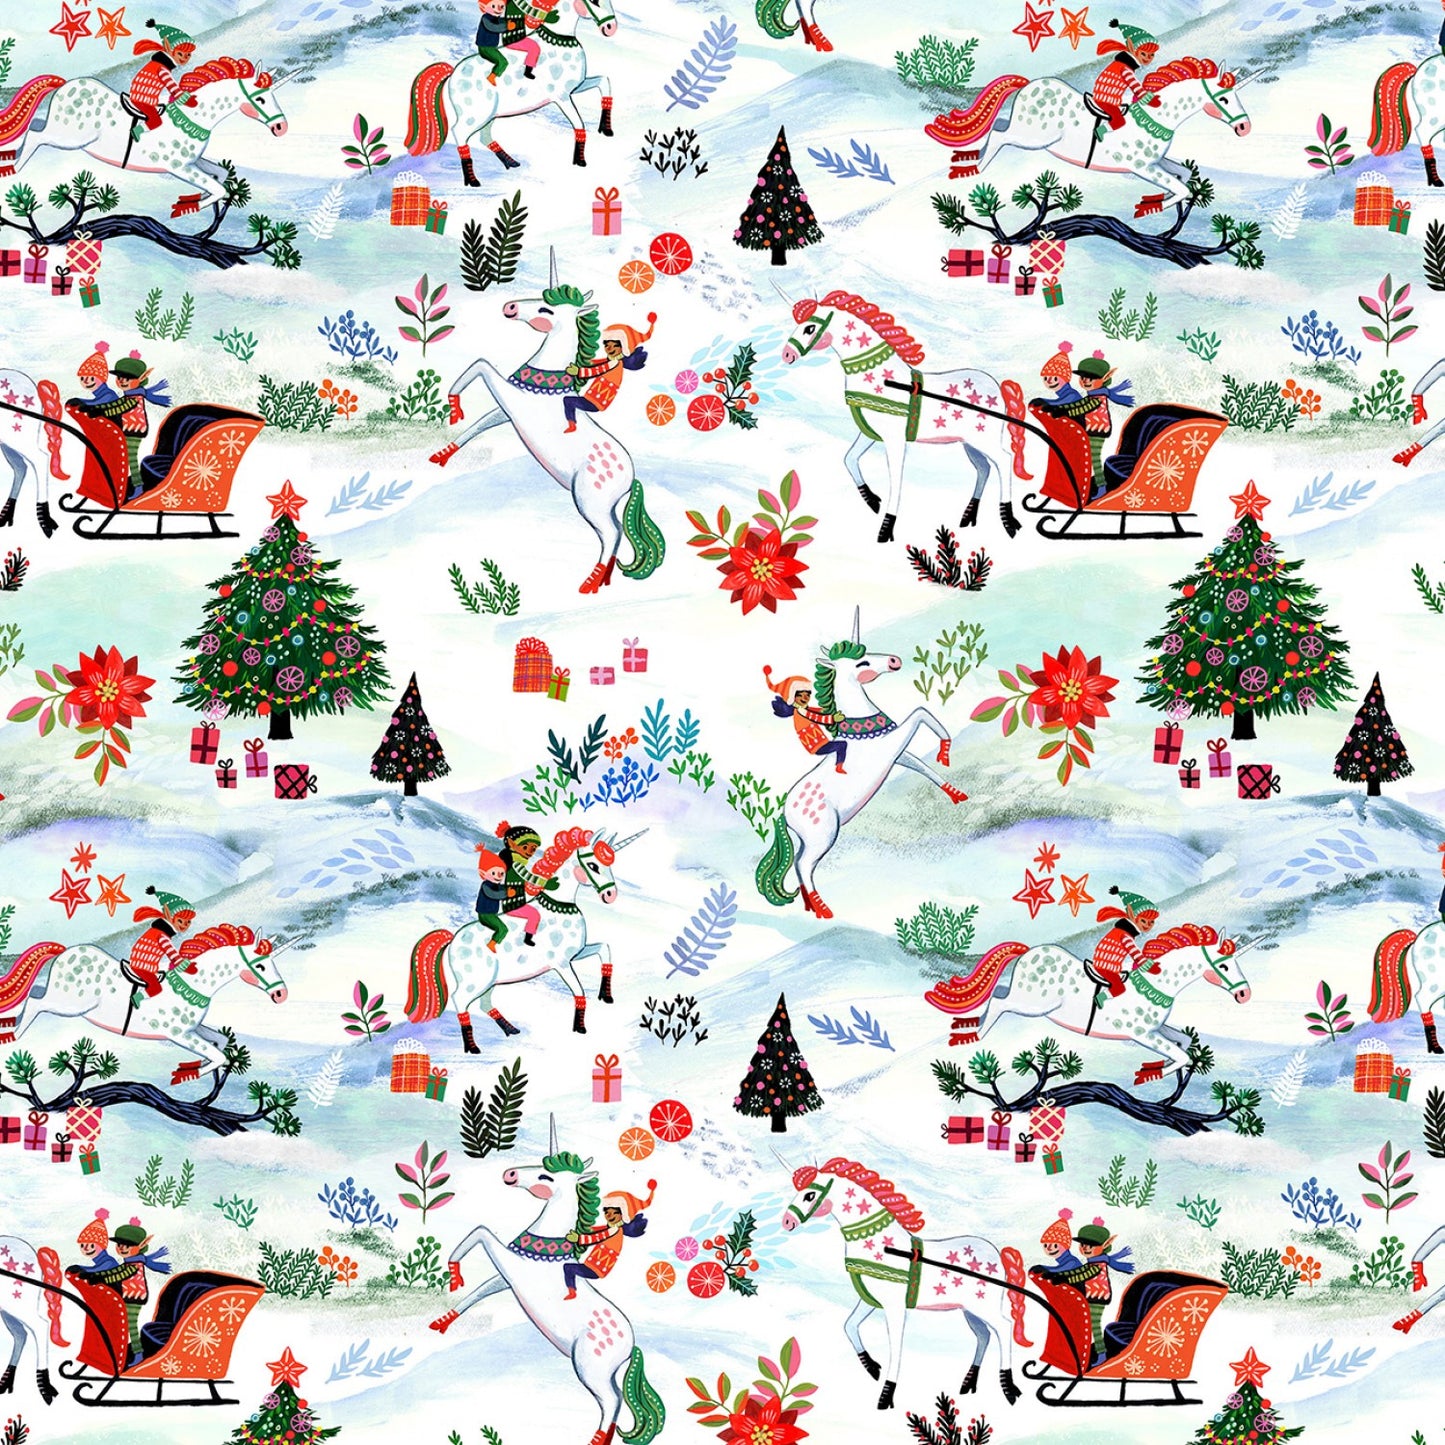 Fantastical Holidays by Miriam Bos Holiday Unicorns     ST-DMB2229MULTI Cotton Woven Fabric